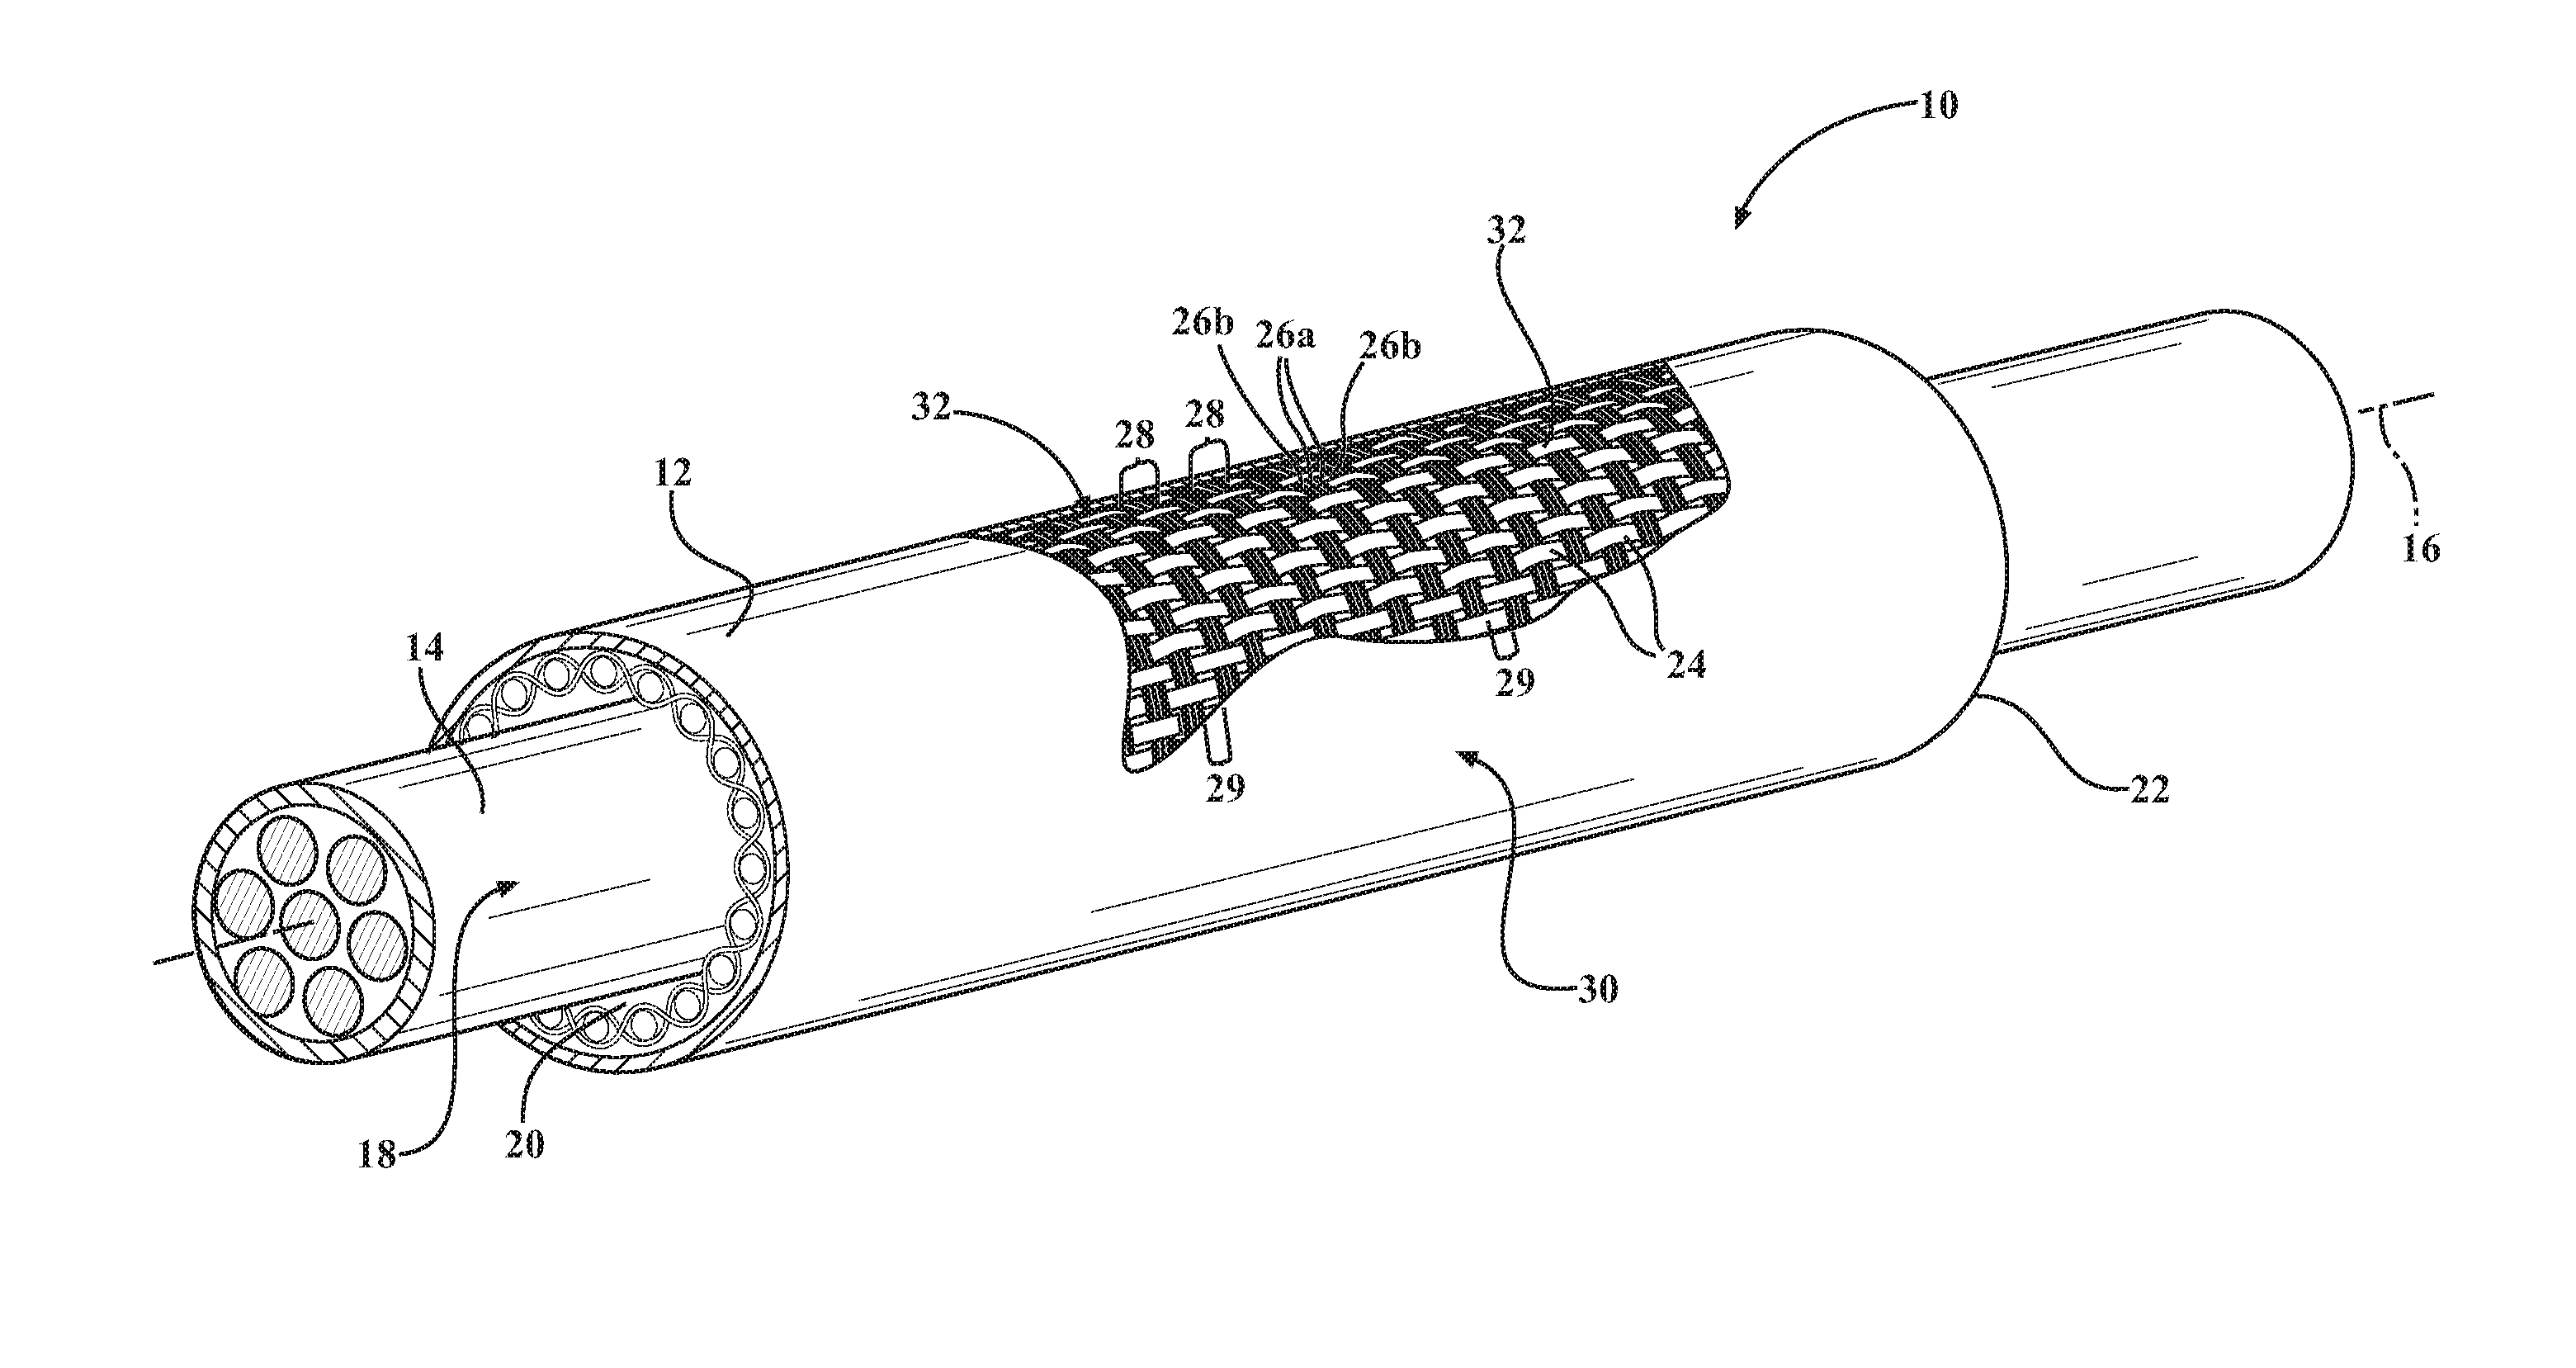 Woven tubular thermal sleeve and method of construction thereof